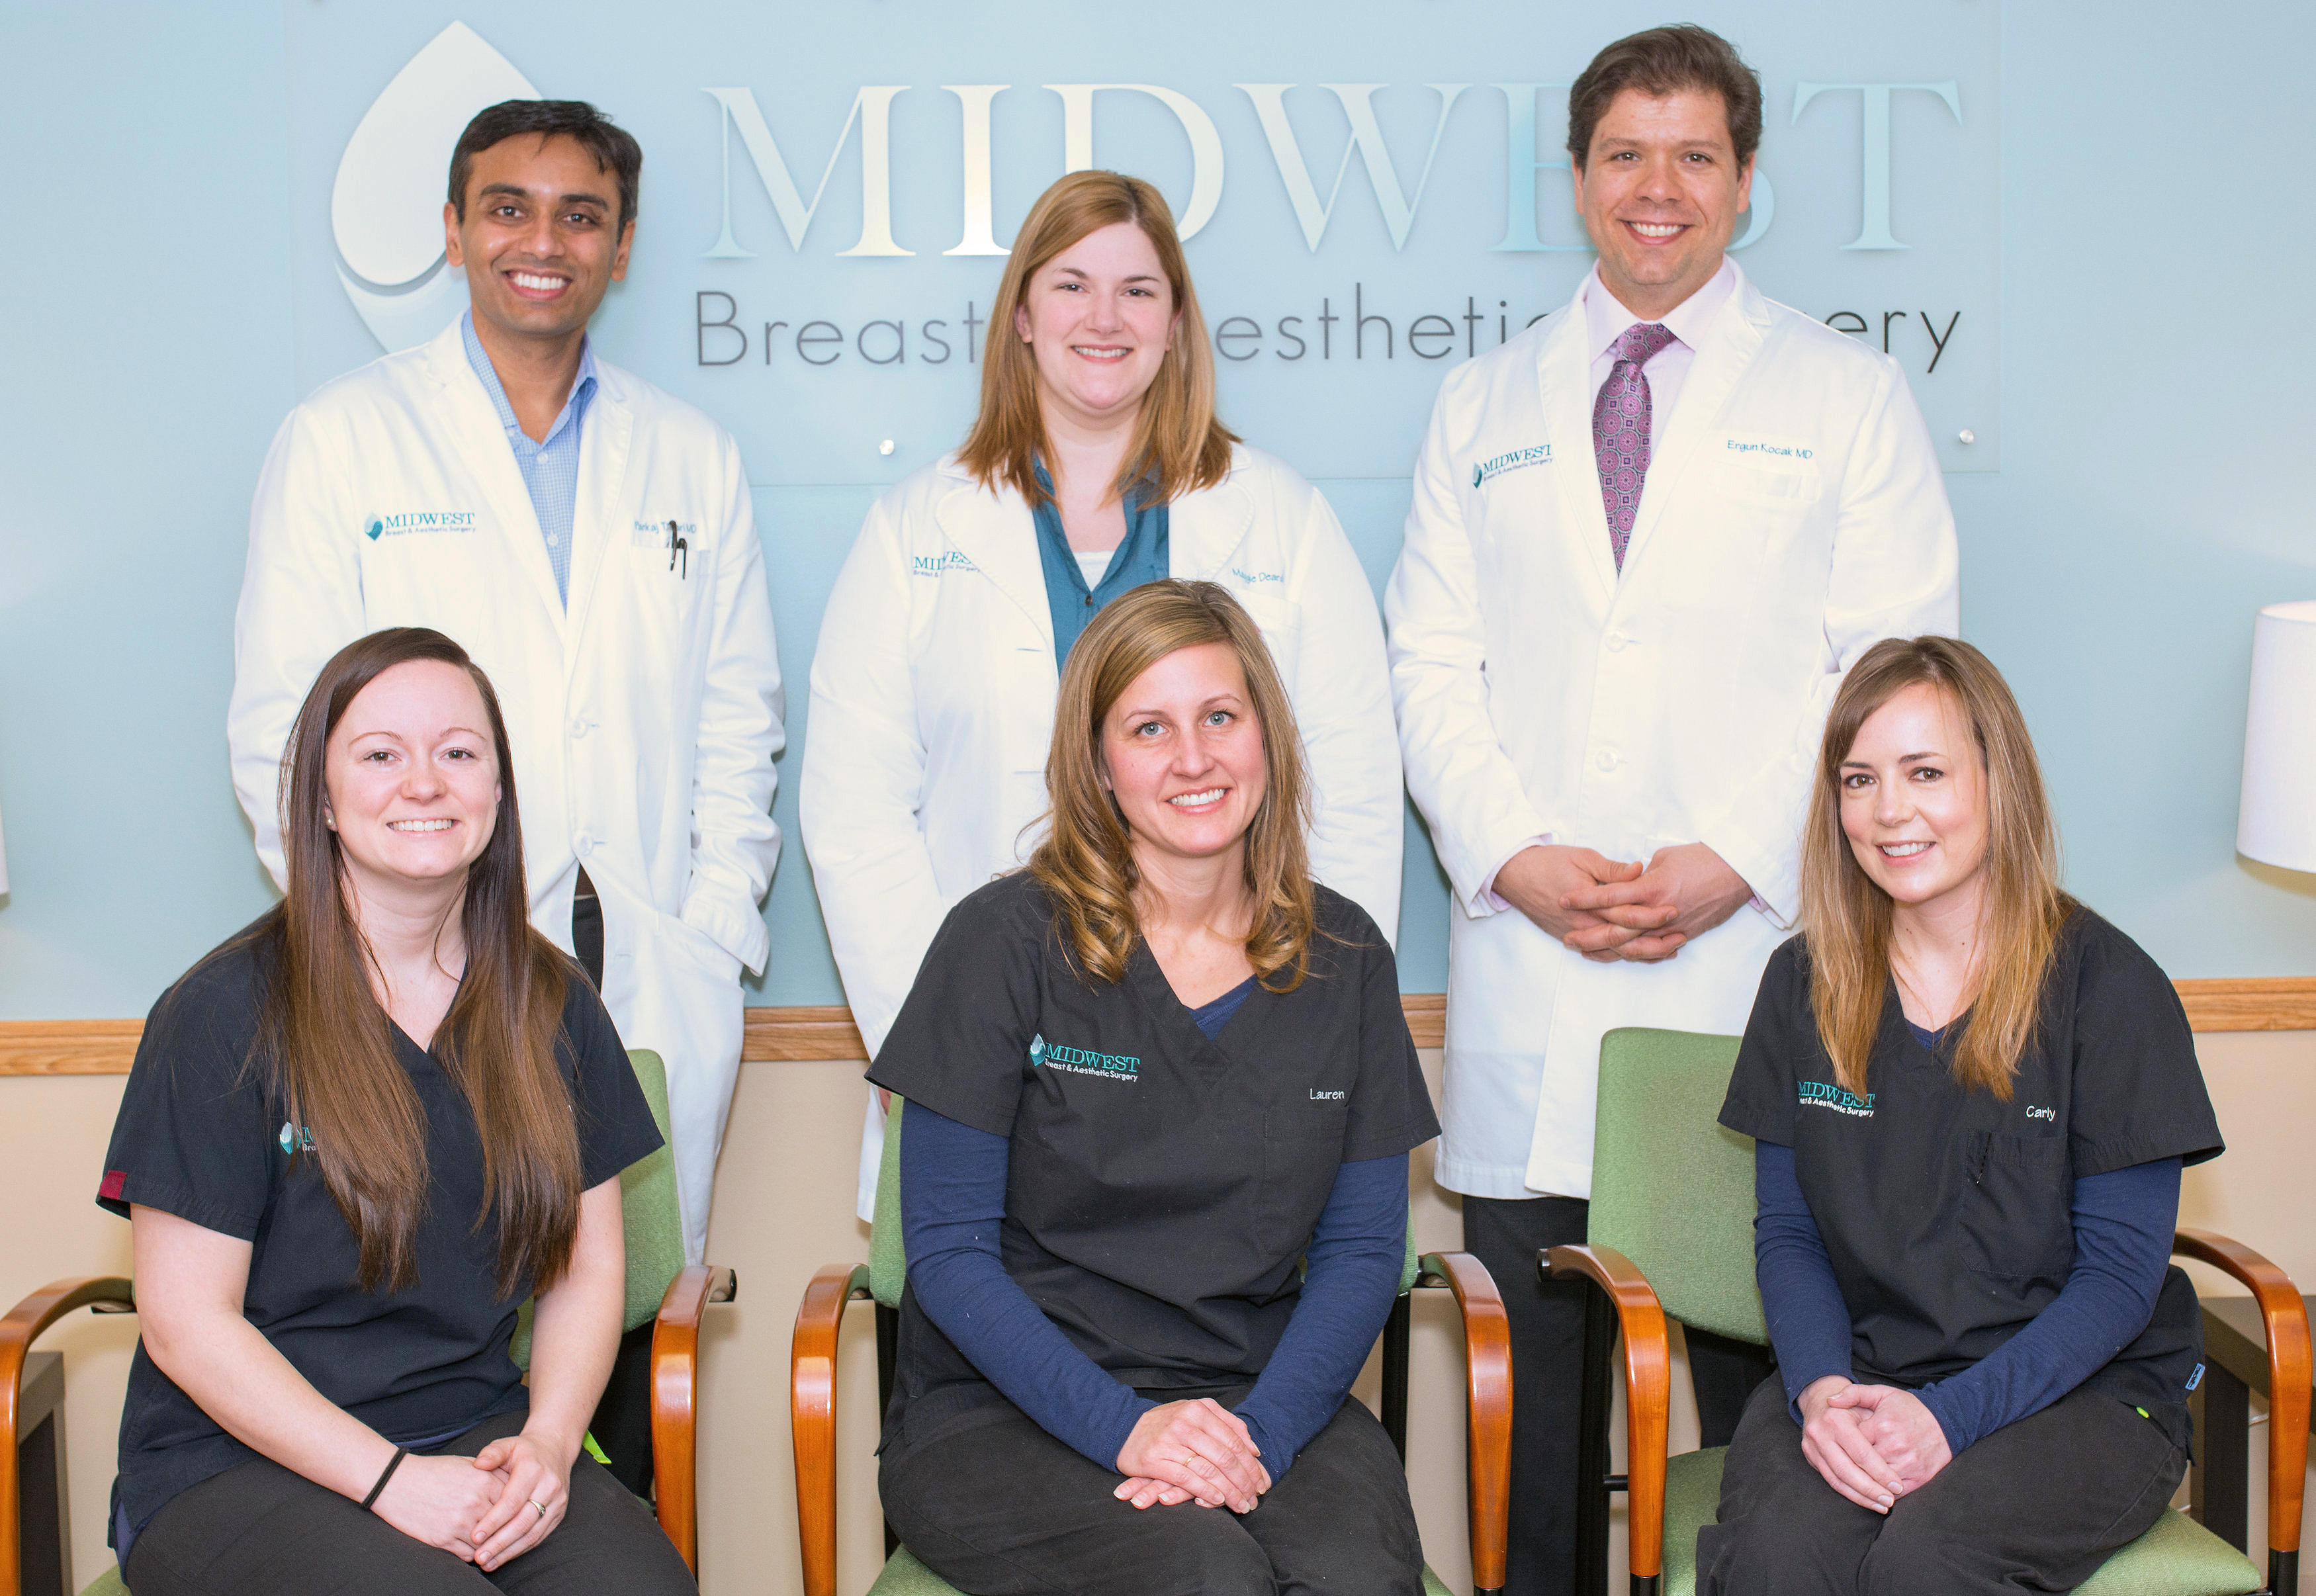 Midwest Breast & Aesthetic Surgery Photo